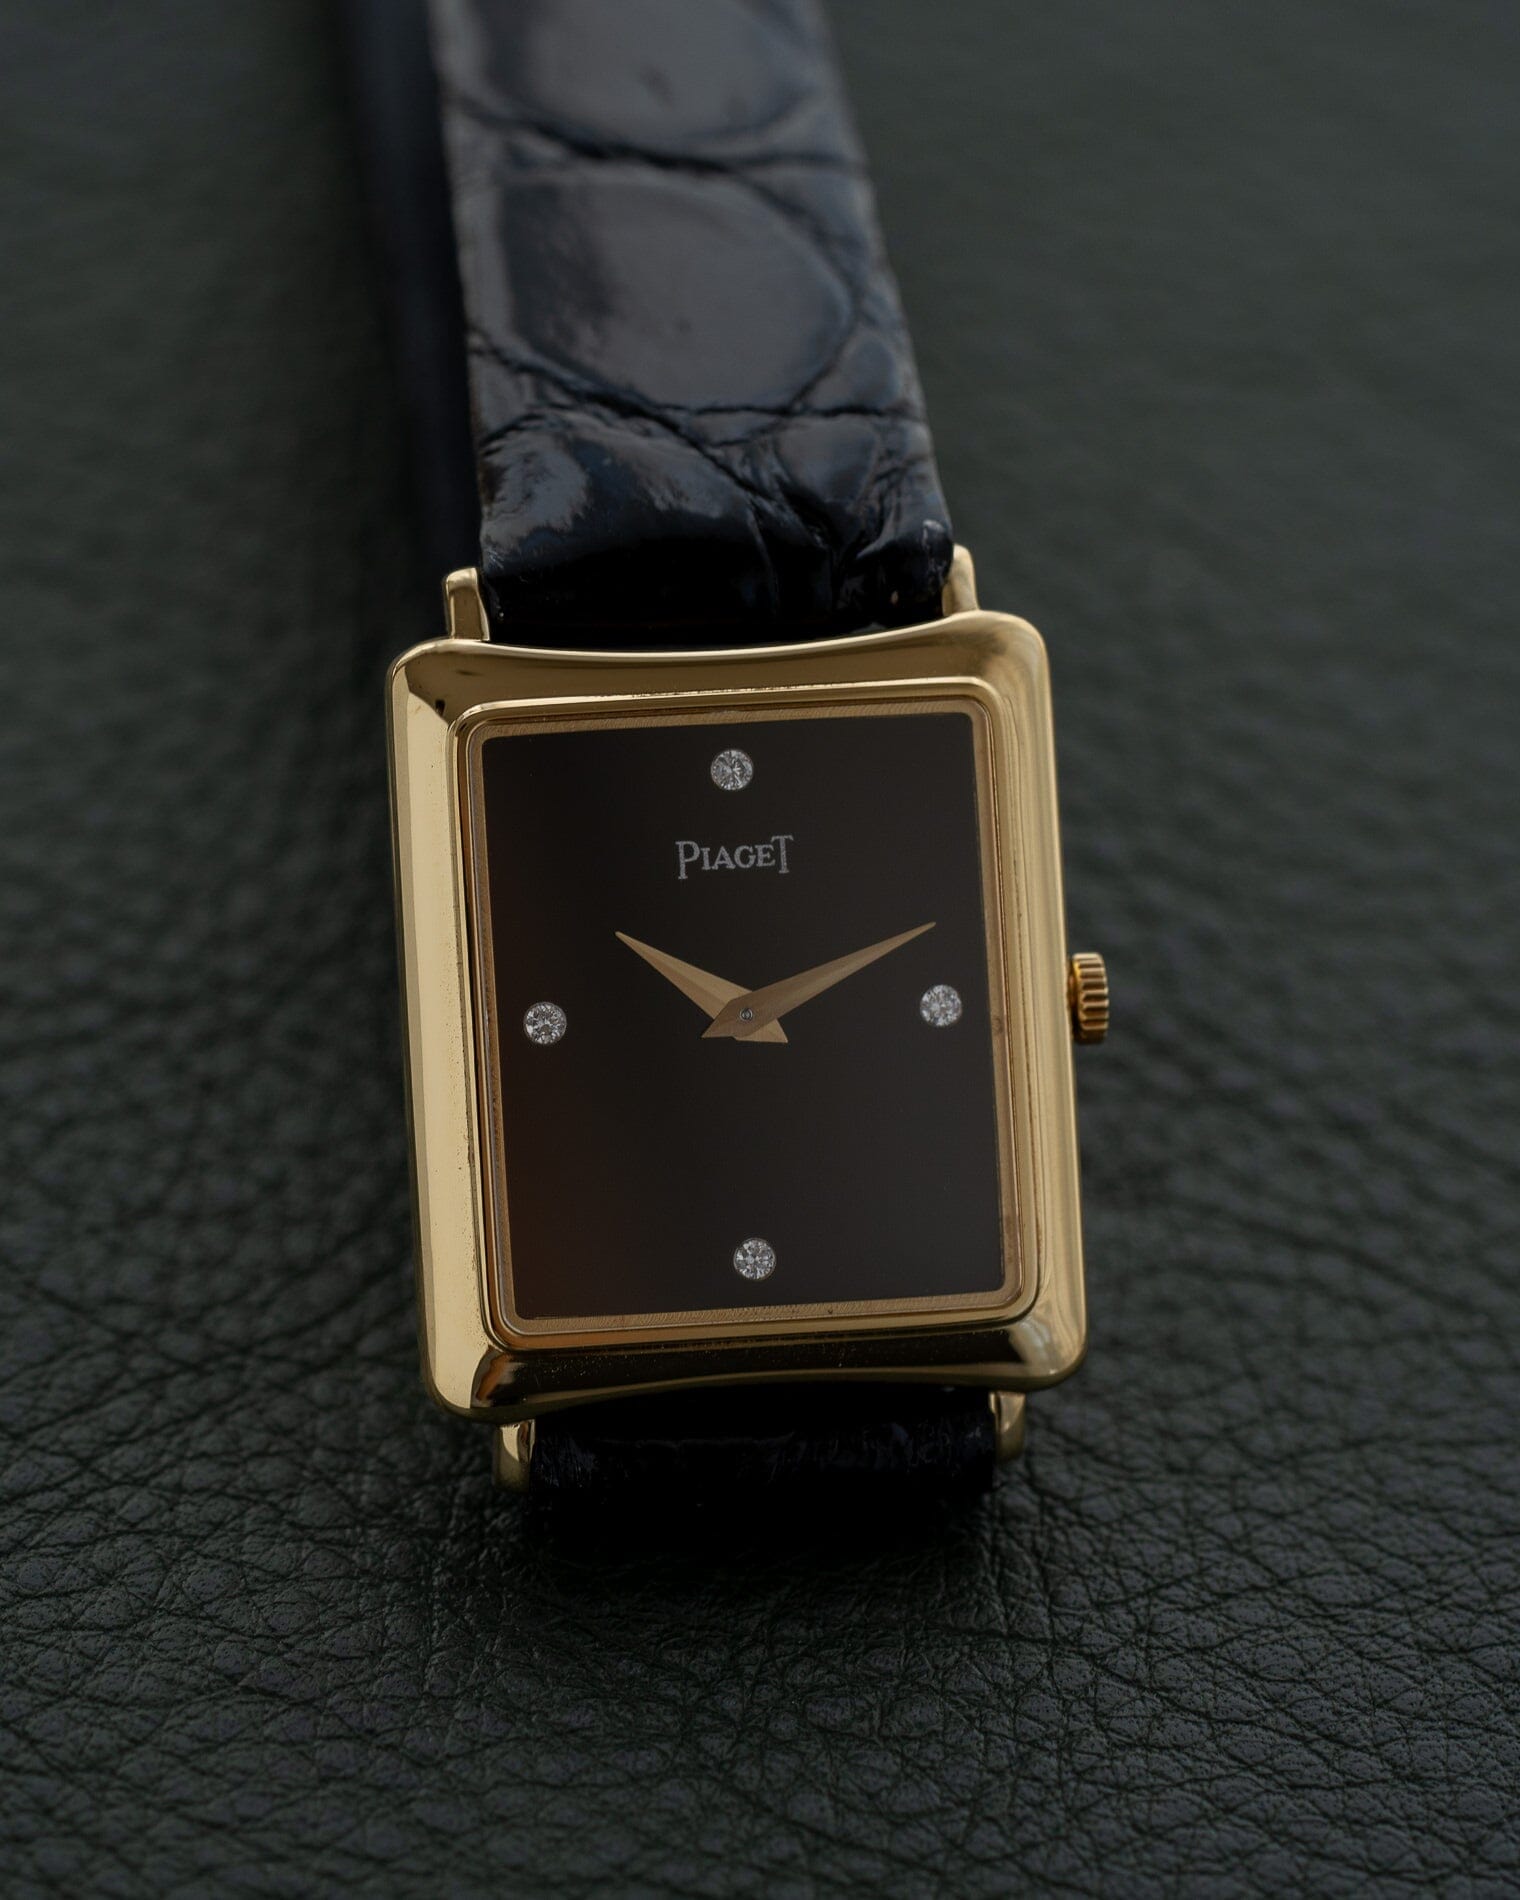 Piaget Rectangle 9254 YG Black Dial with 4 Diamond Indexes